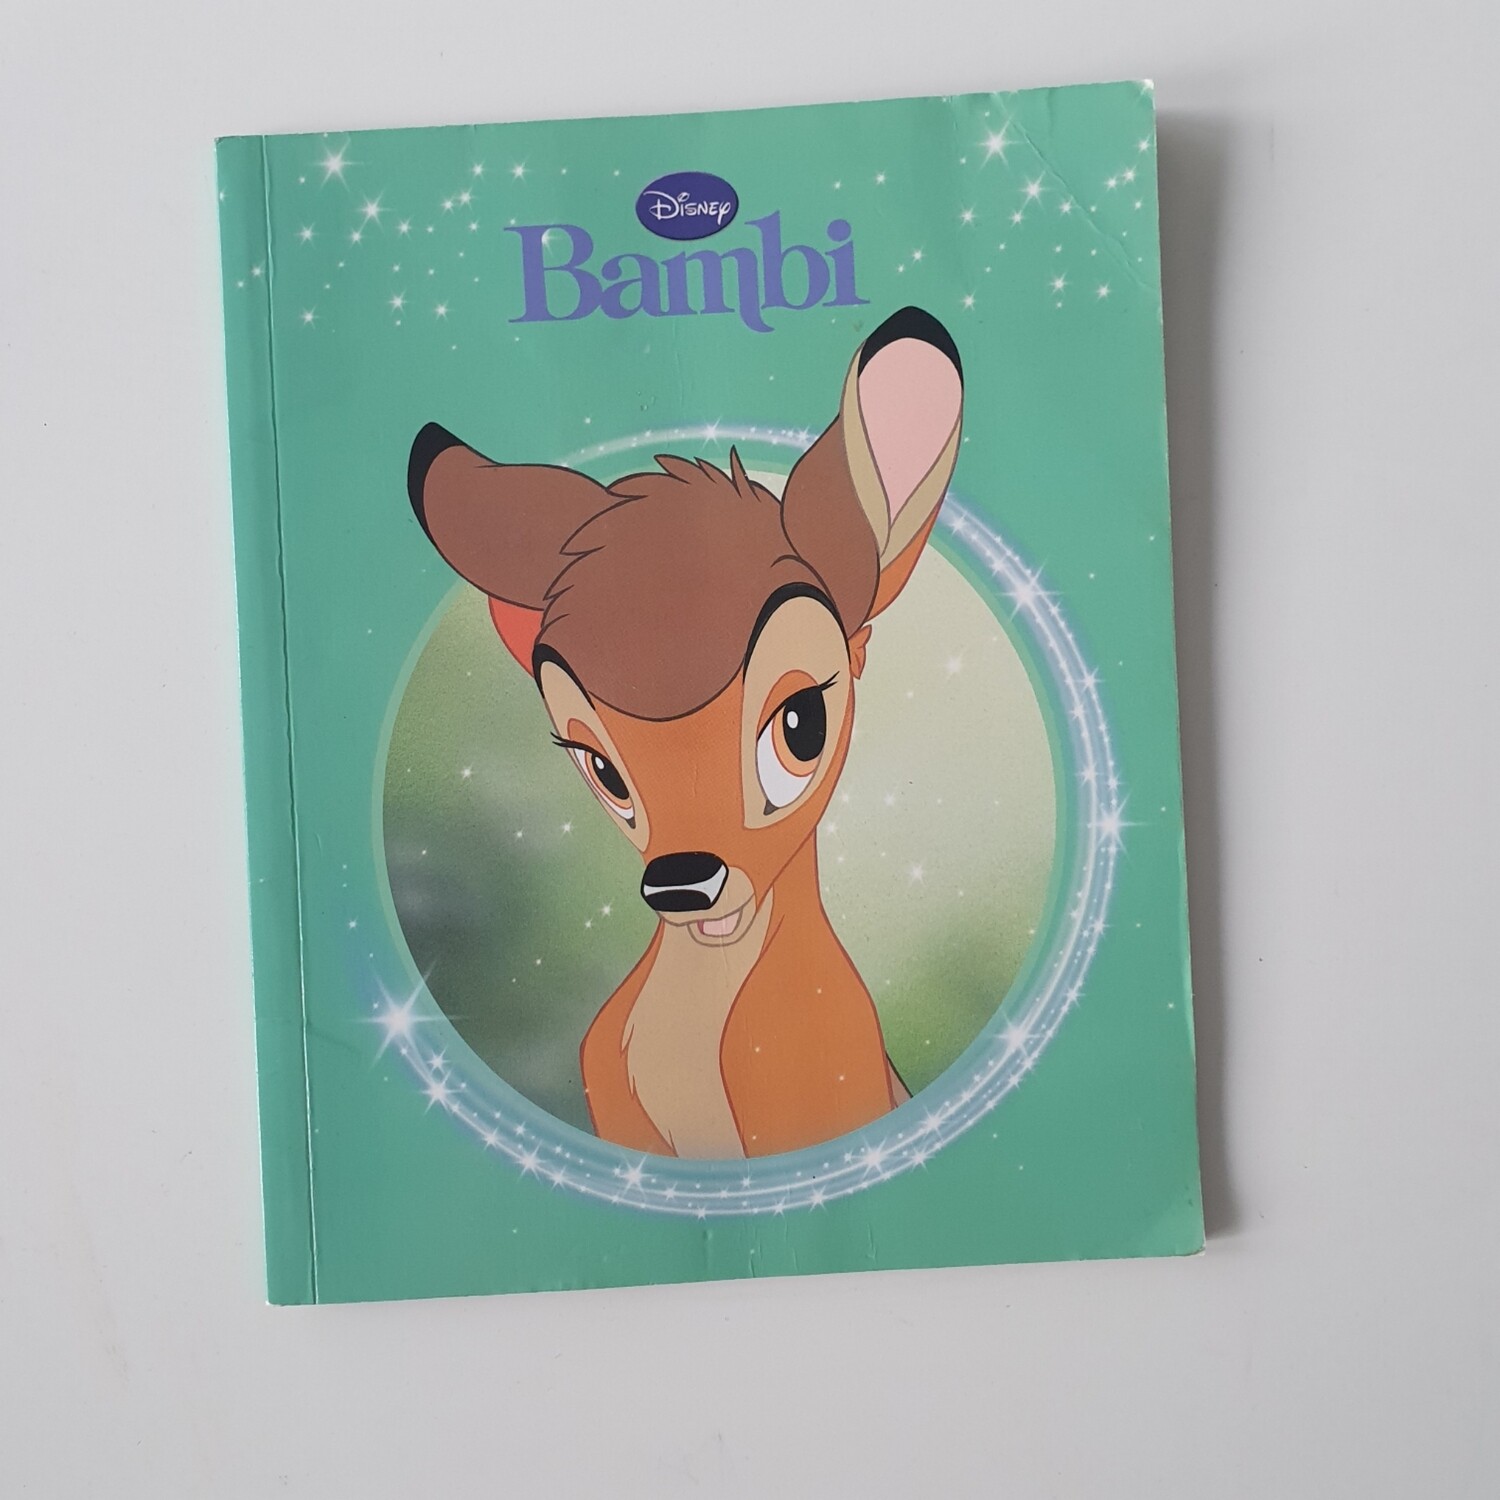 Bambi Notebook - board book will come with metal book corners included